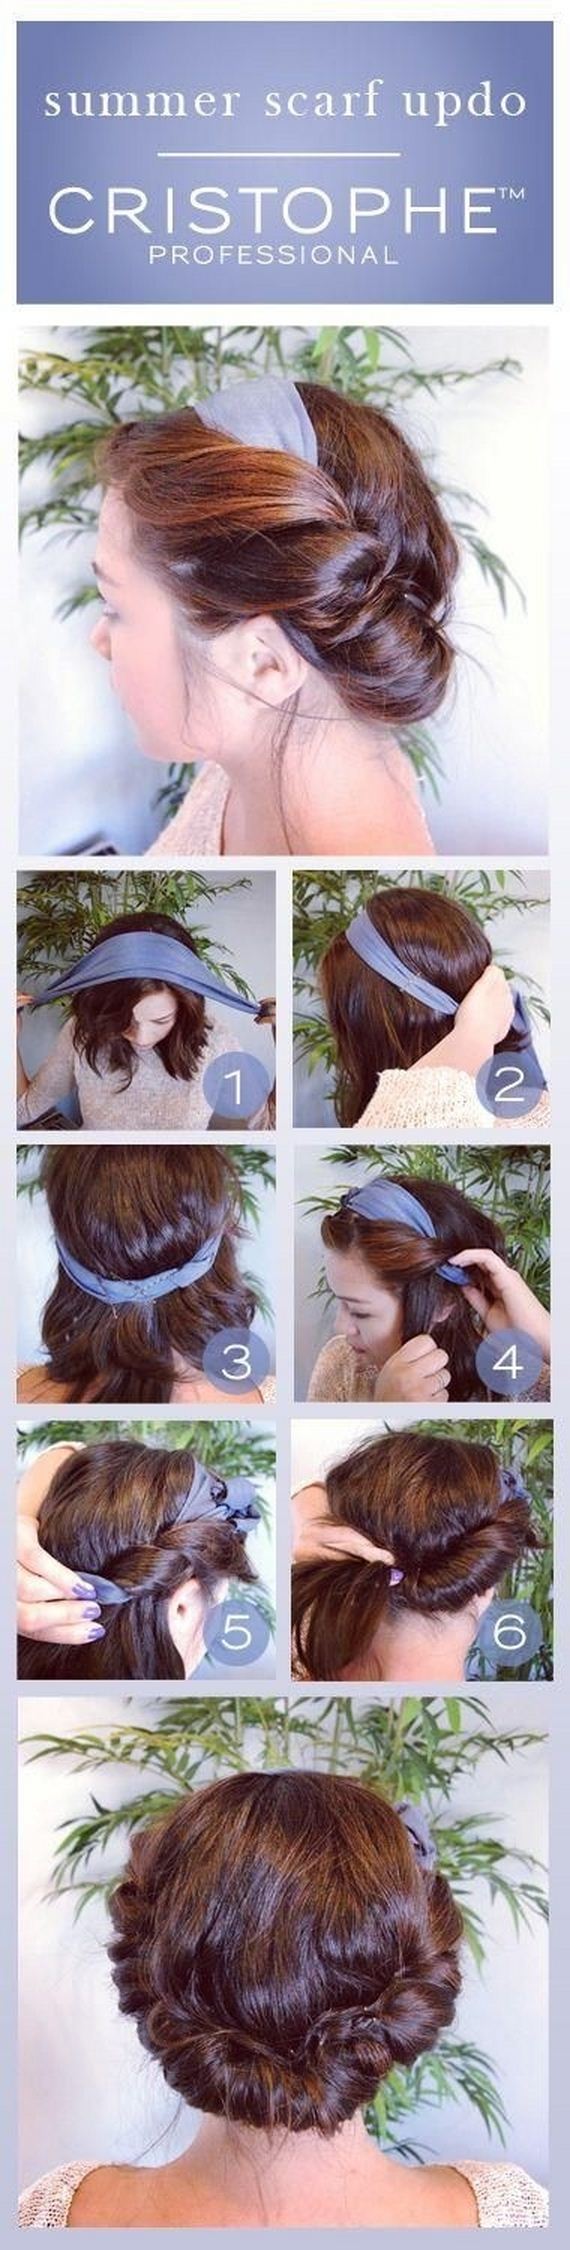 03-Five-Minute-Hairstyles